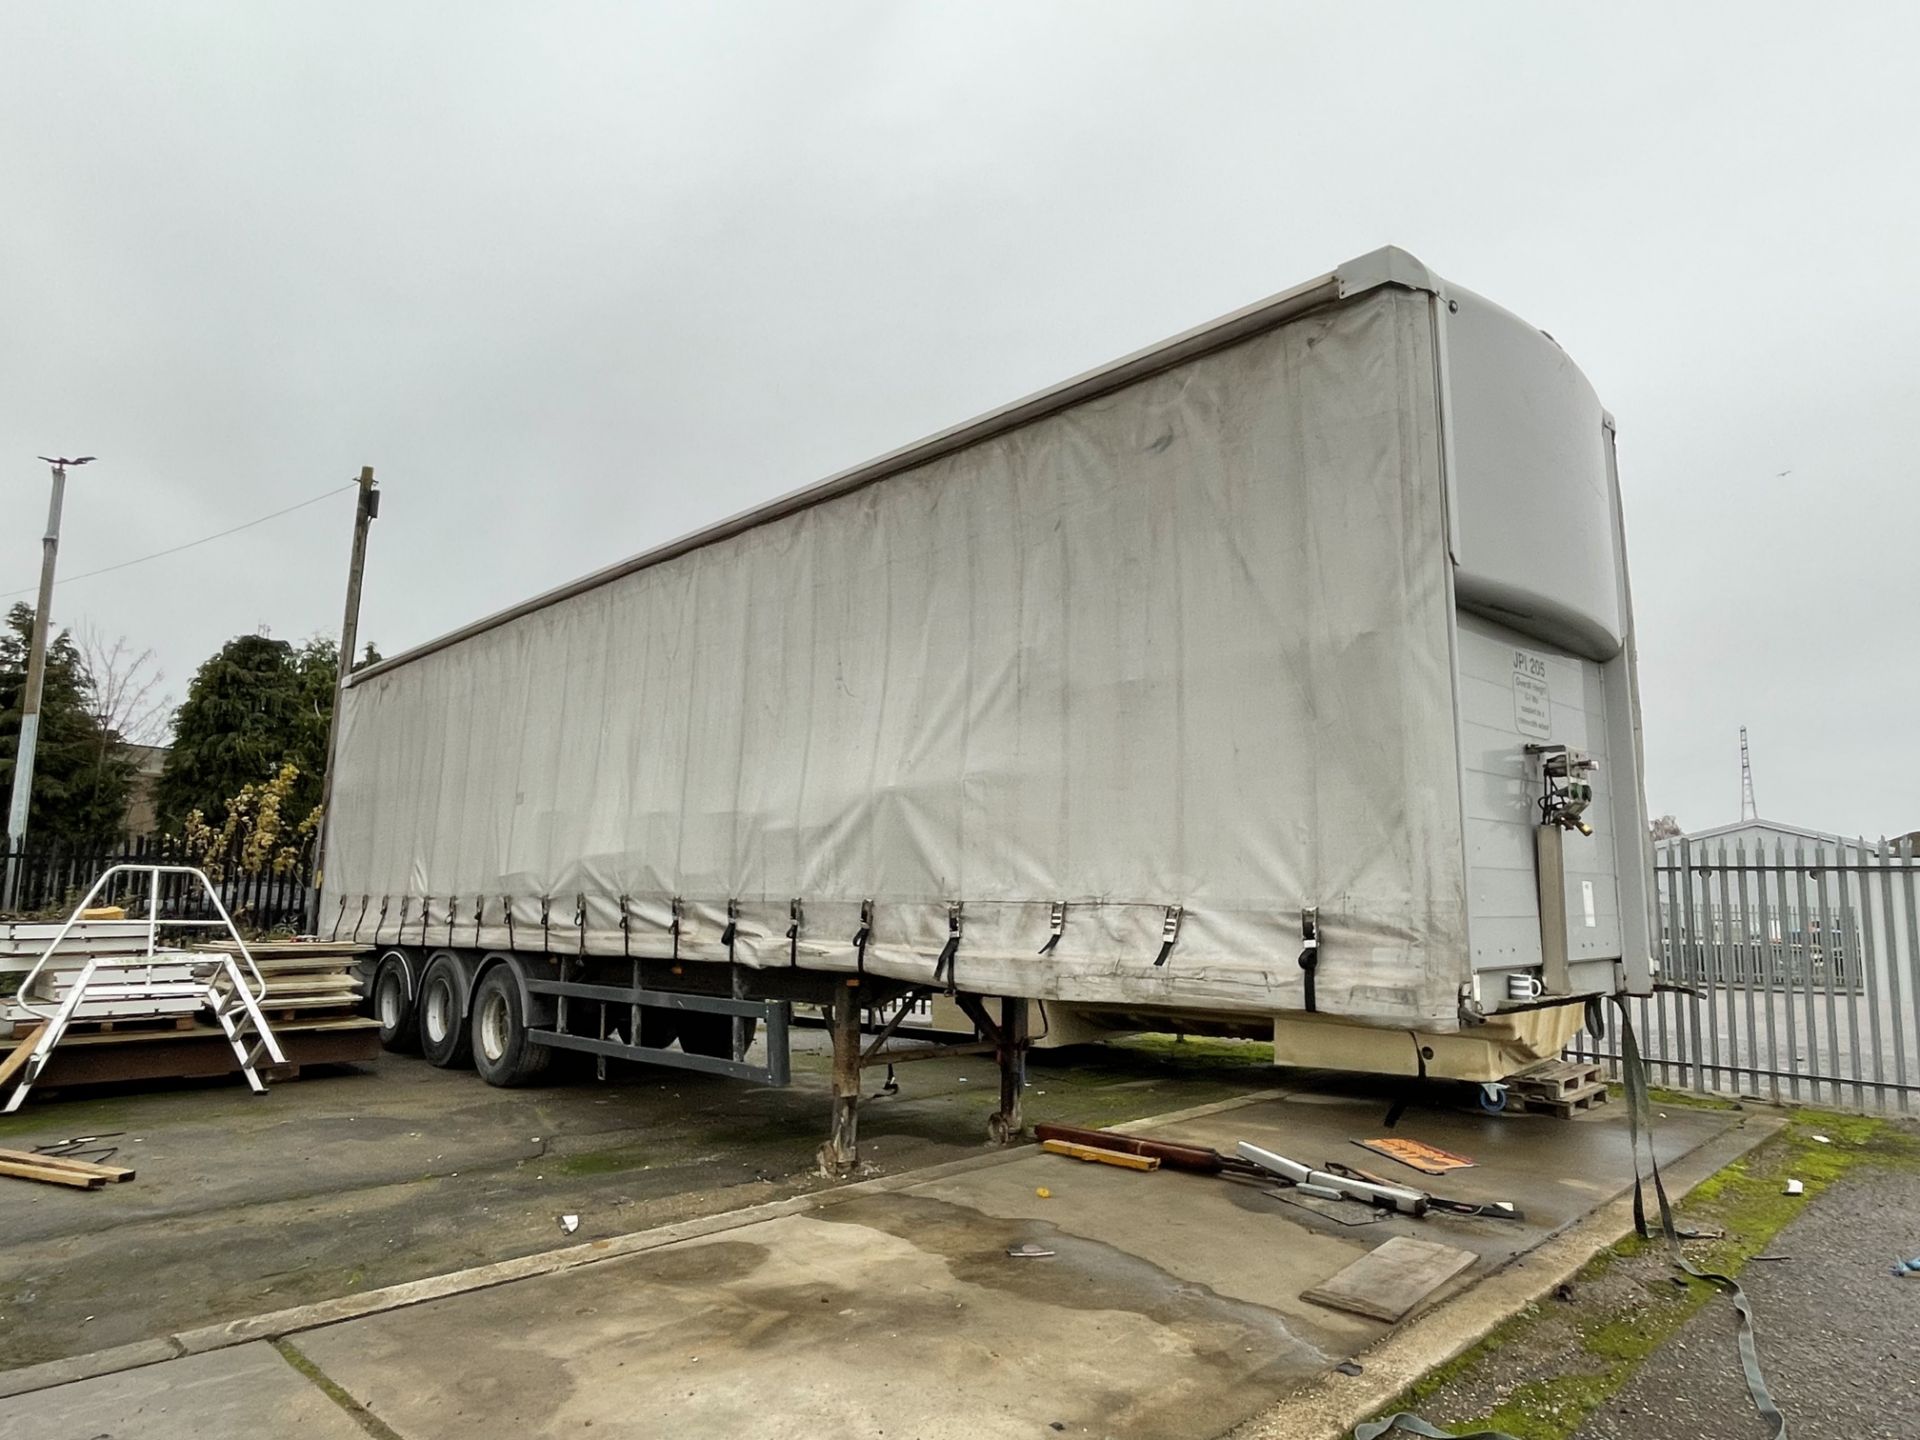 2005 SDC Trailers 45' Artic Curtainside Tri-Axle Trailer with Rear Barn Doors, Design Weight: 39,